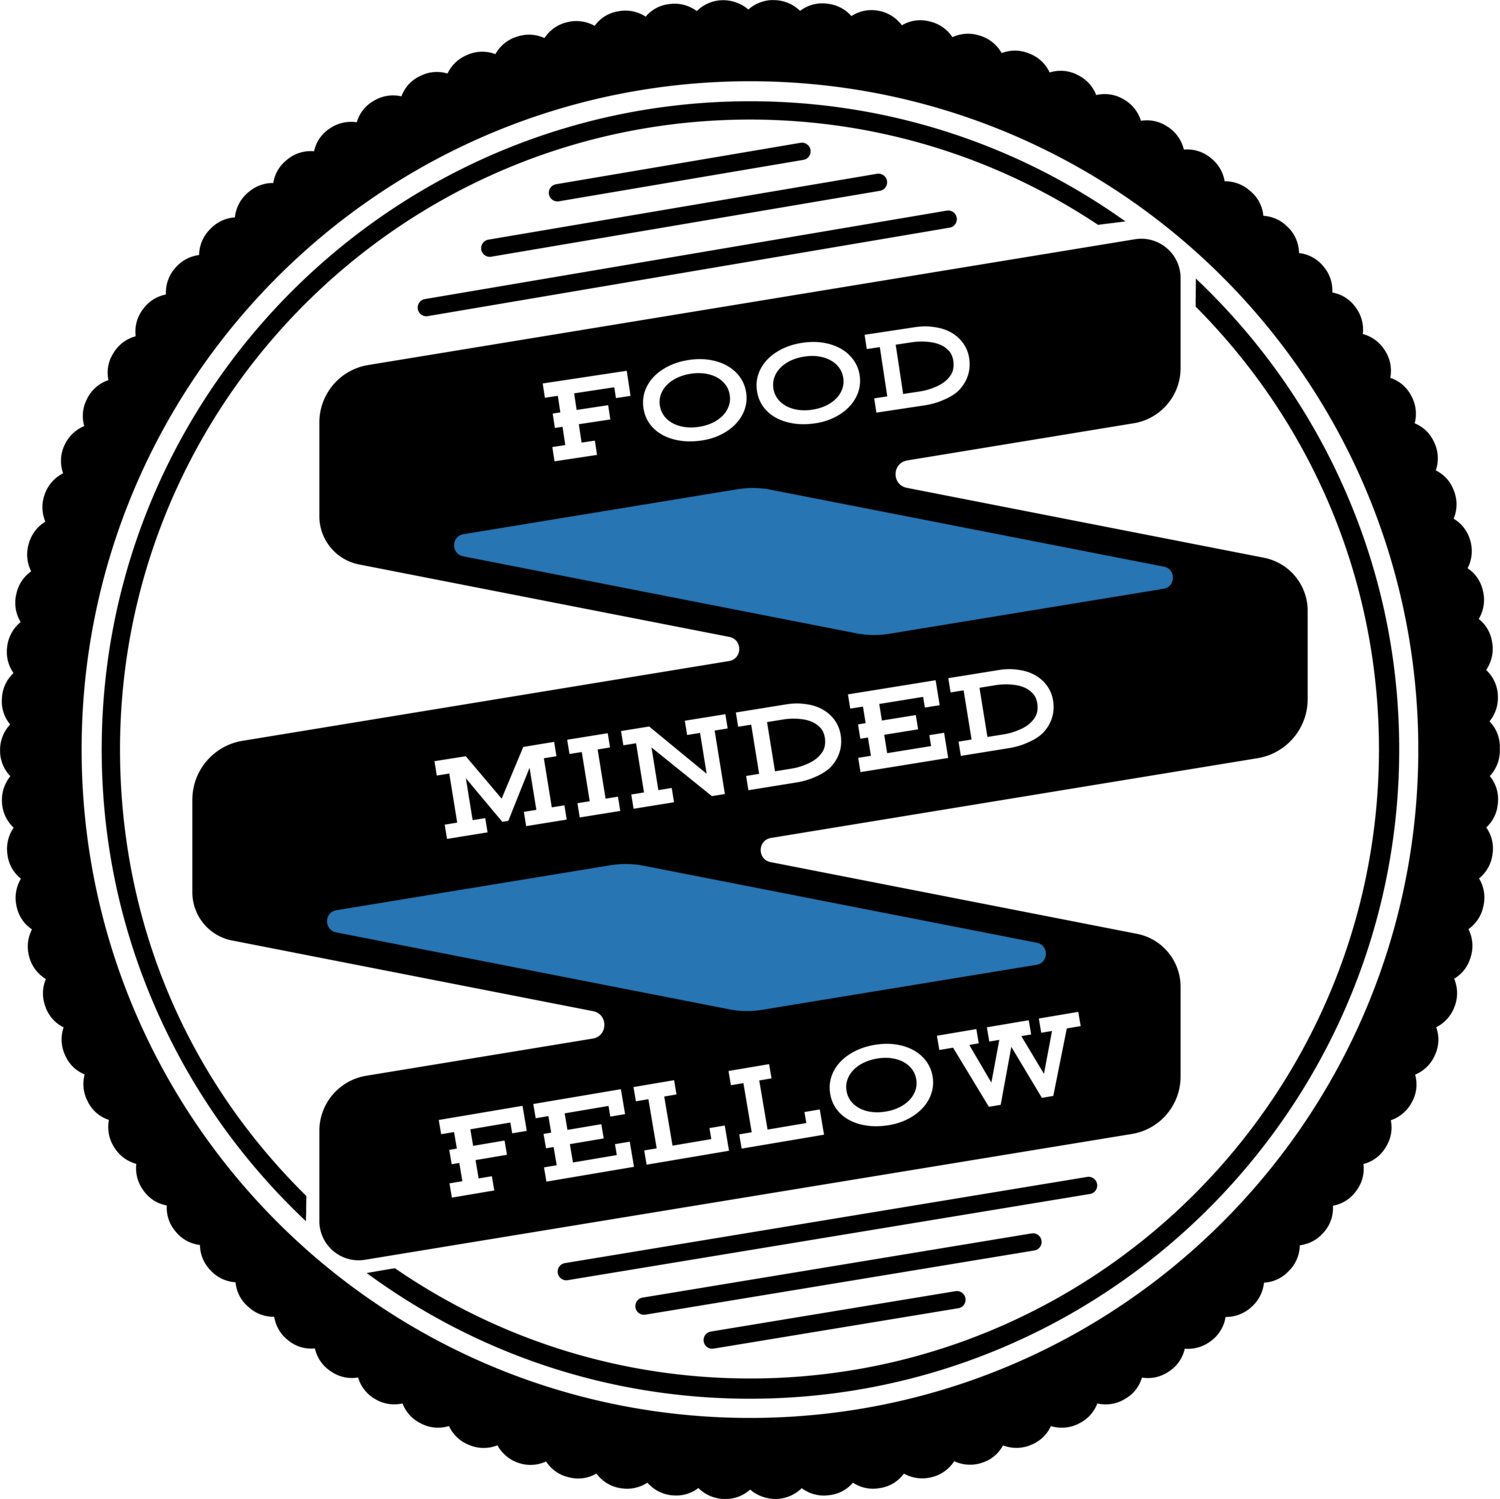 Food Minded Fellow